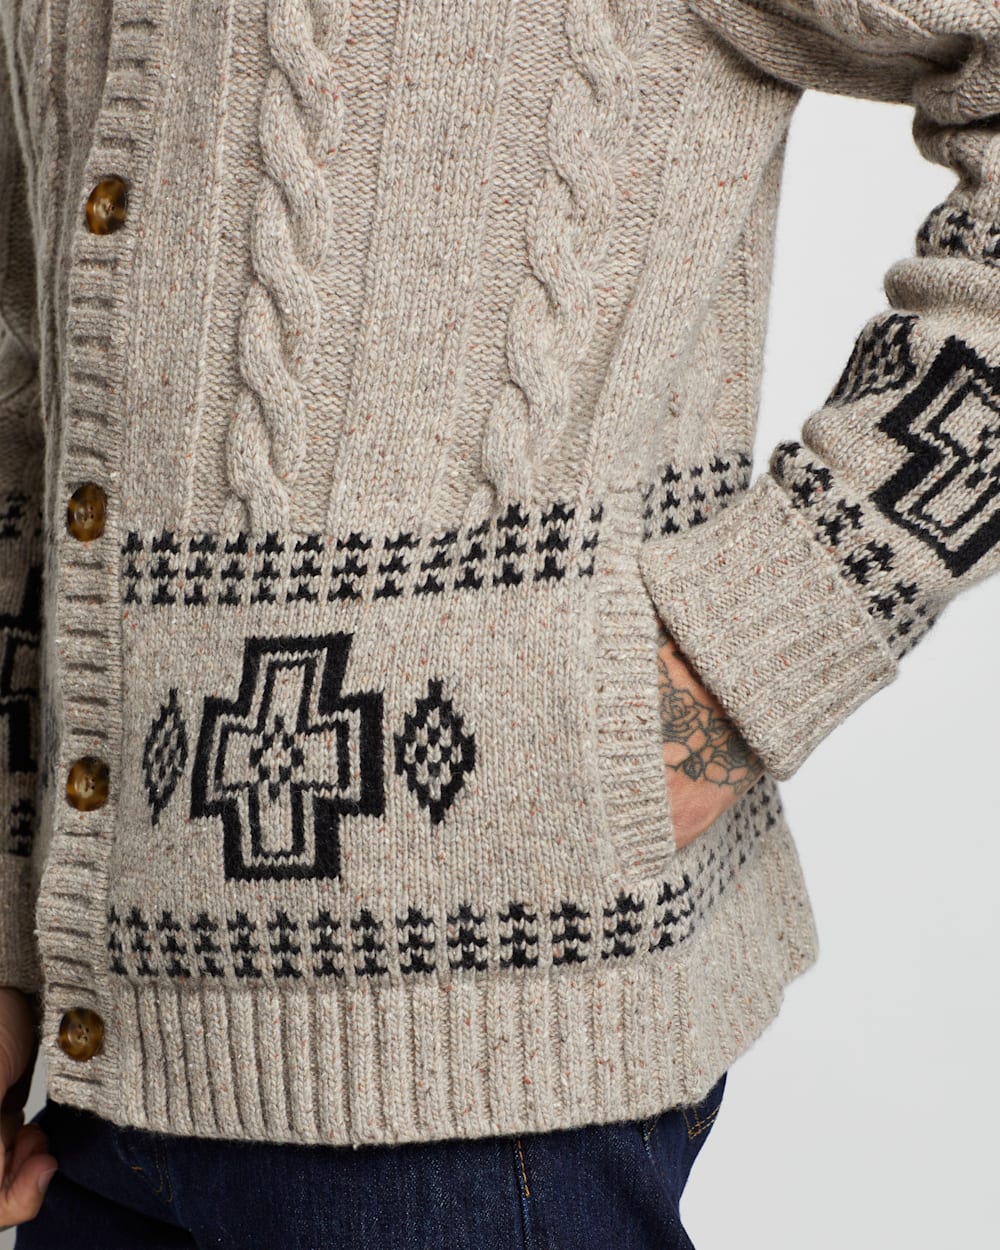 ALTERNATE VIEW OF MEN'S CABLE CROSS LAMBSWOOL CARDIGAN IN NATURAL DONEGAL image number 3